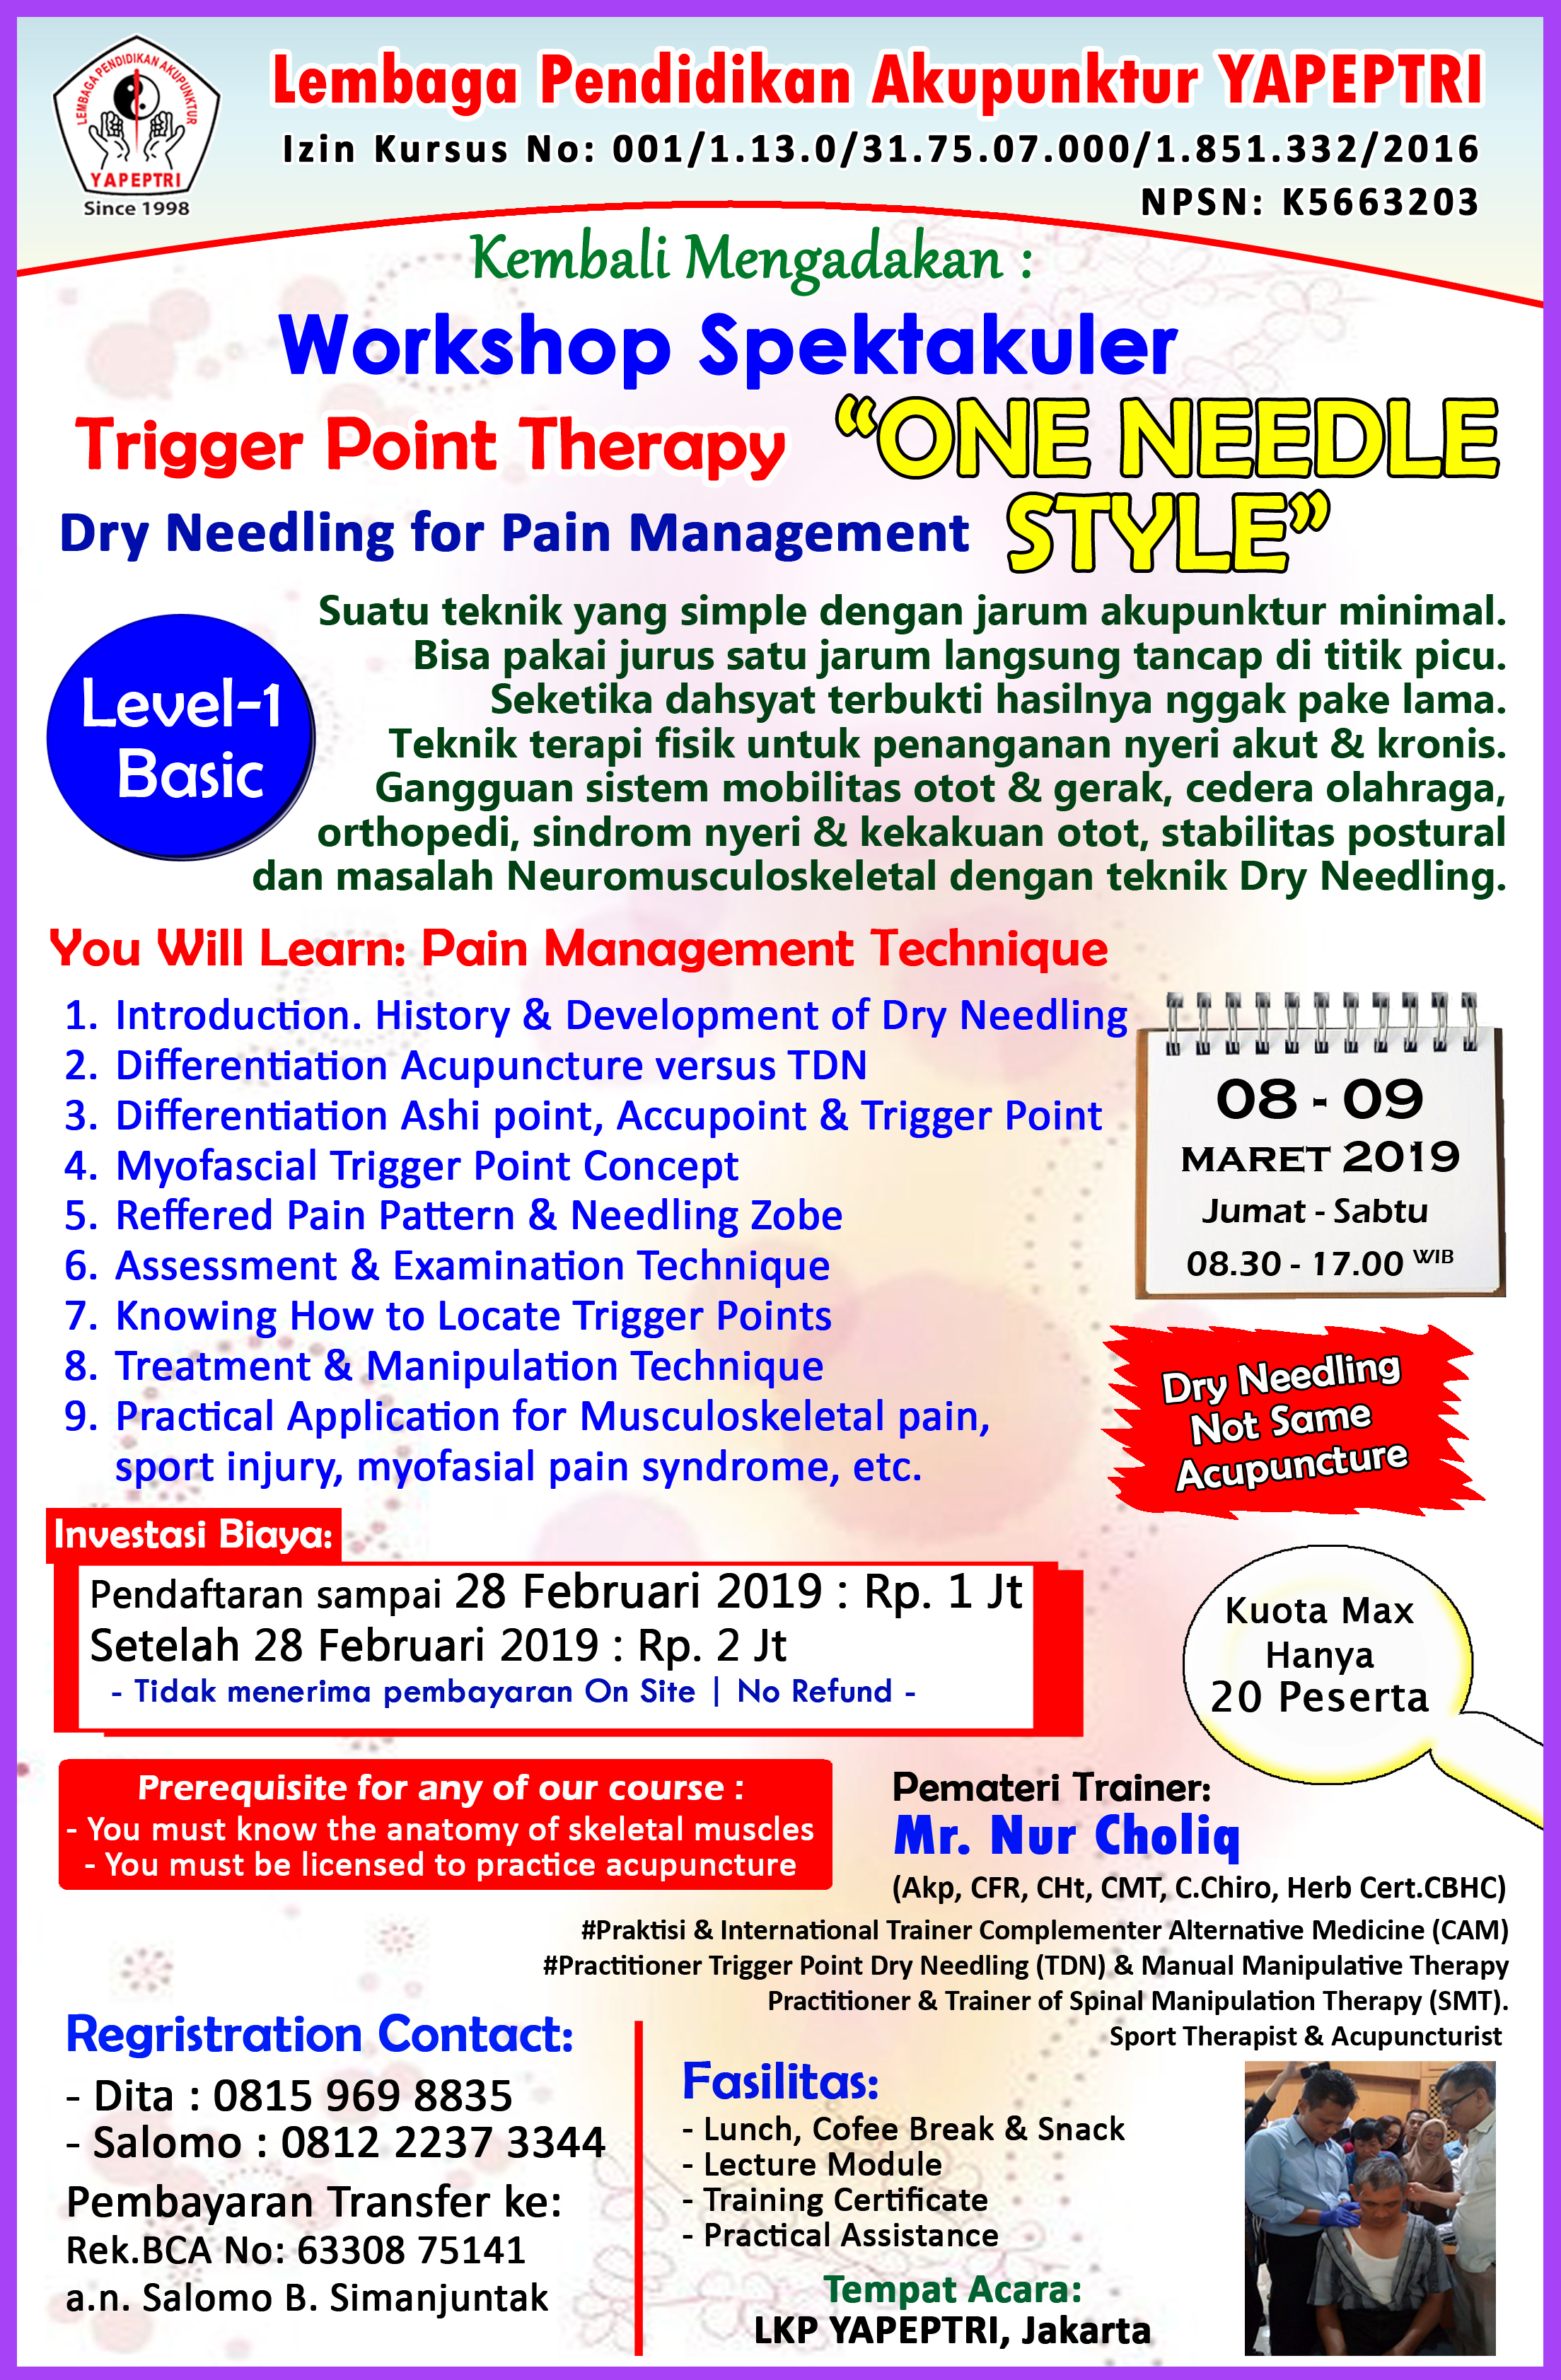 Seminar dan Workshop Trigger Point Therapy "ONE NEEDLE STYLE"